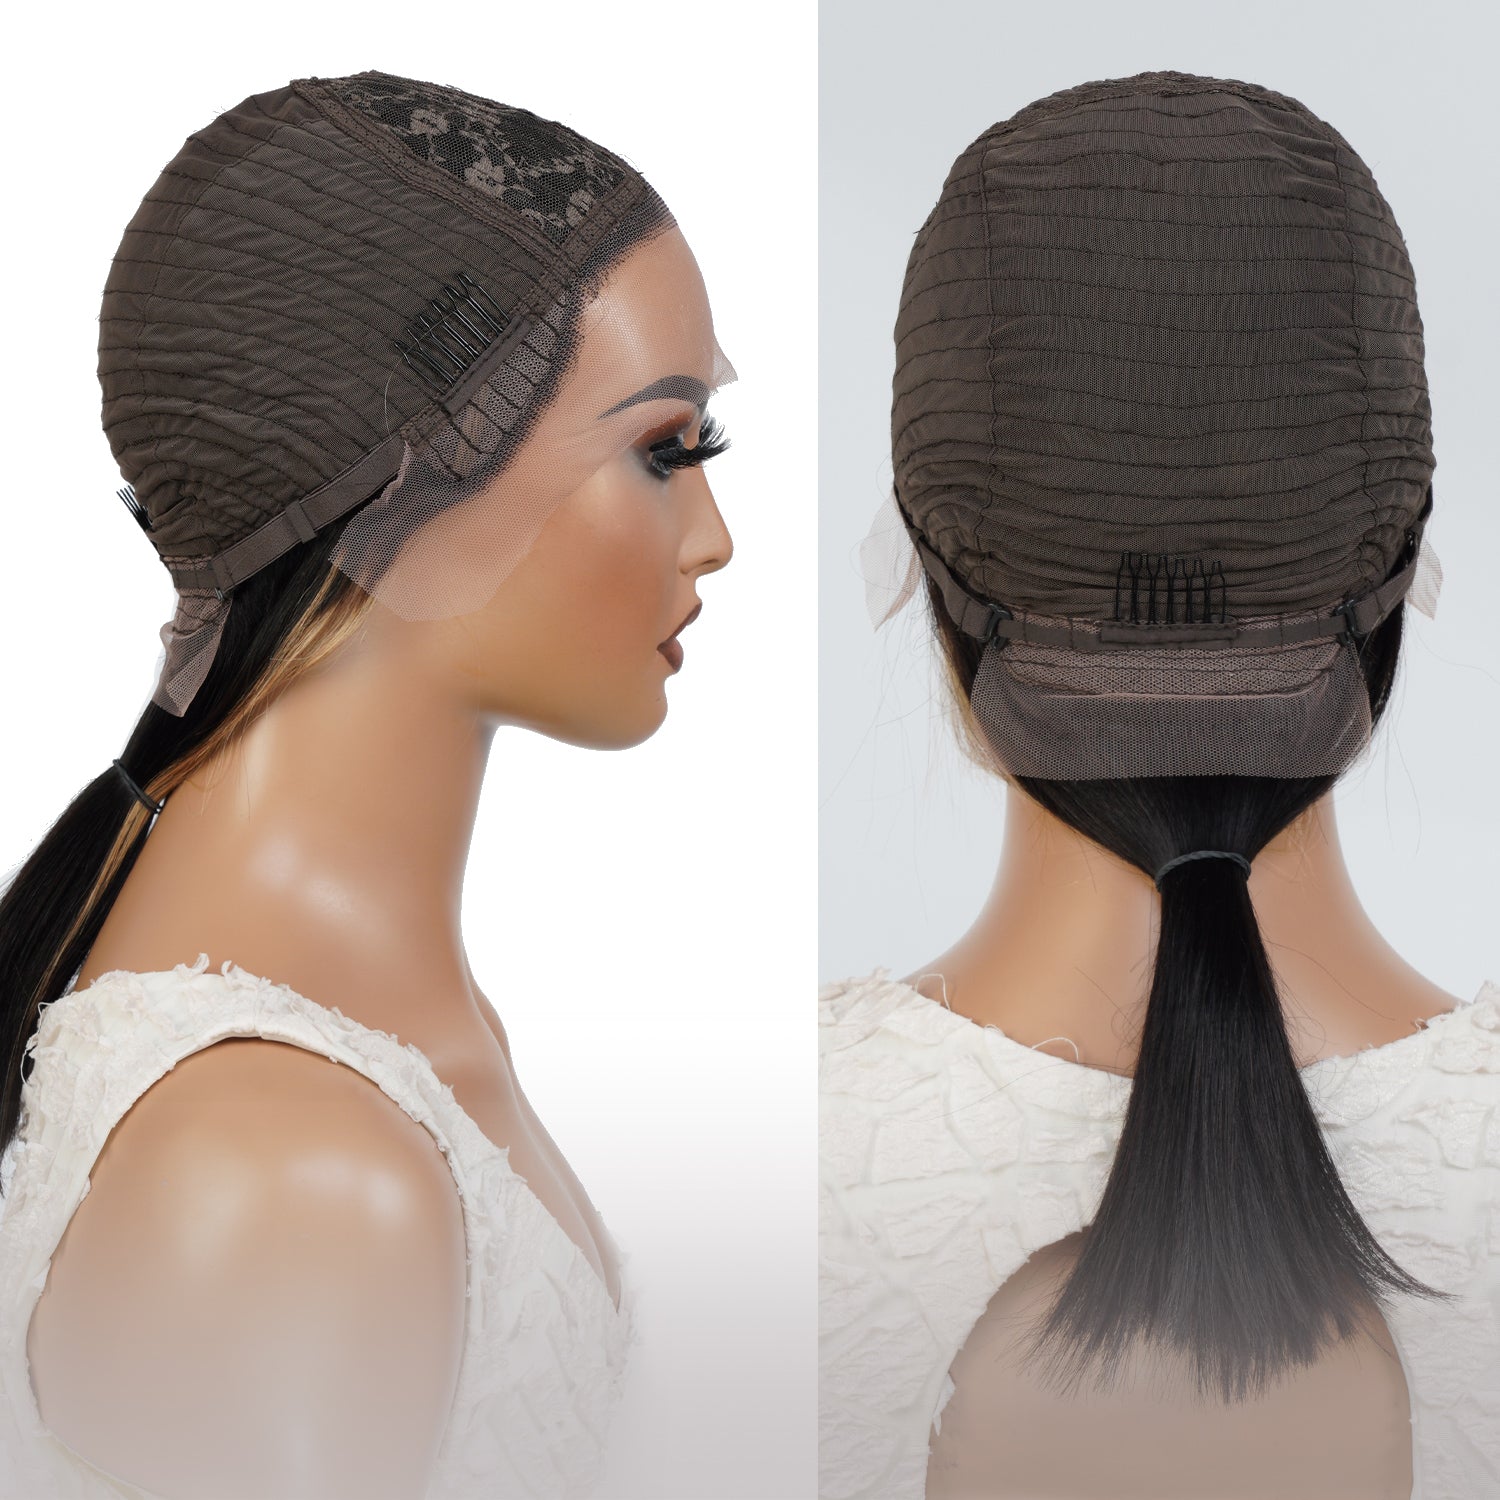 T shape lace part wig gives natural hairline and realistic lace part with affordable price, Medium Length Bob Style, Most trendy Face Framing Highlight Ombre Hair color. No extra money for hair dyeing, Pre-bleached by expert